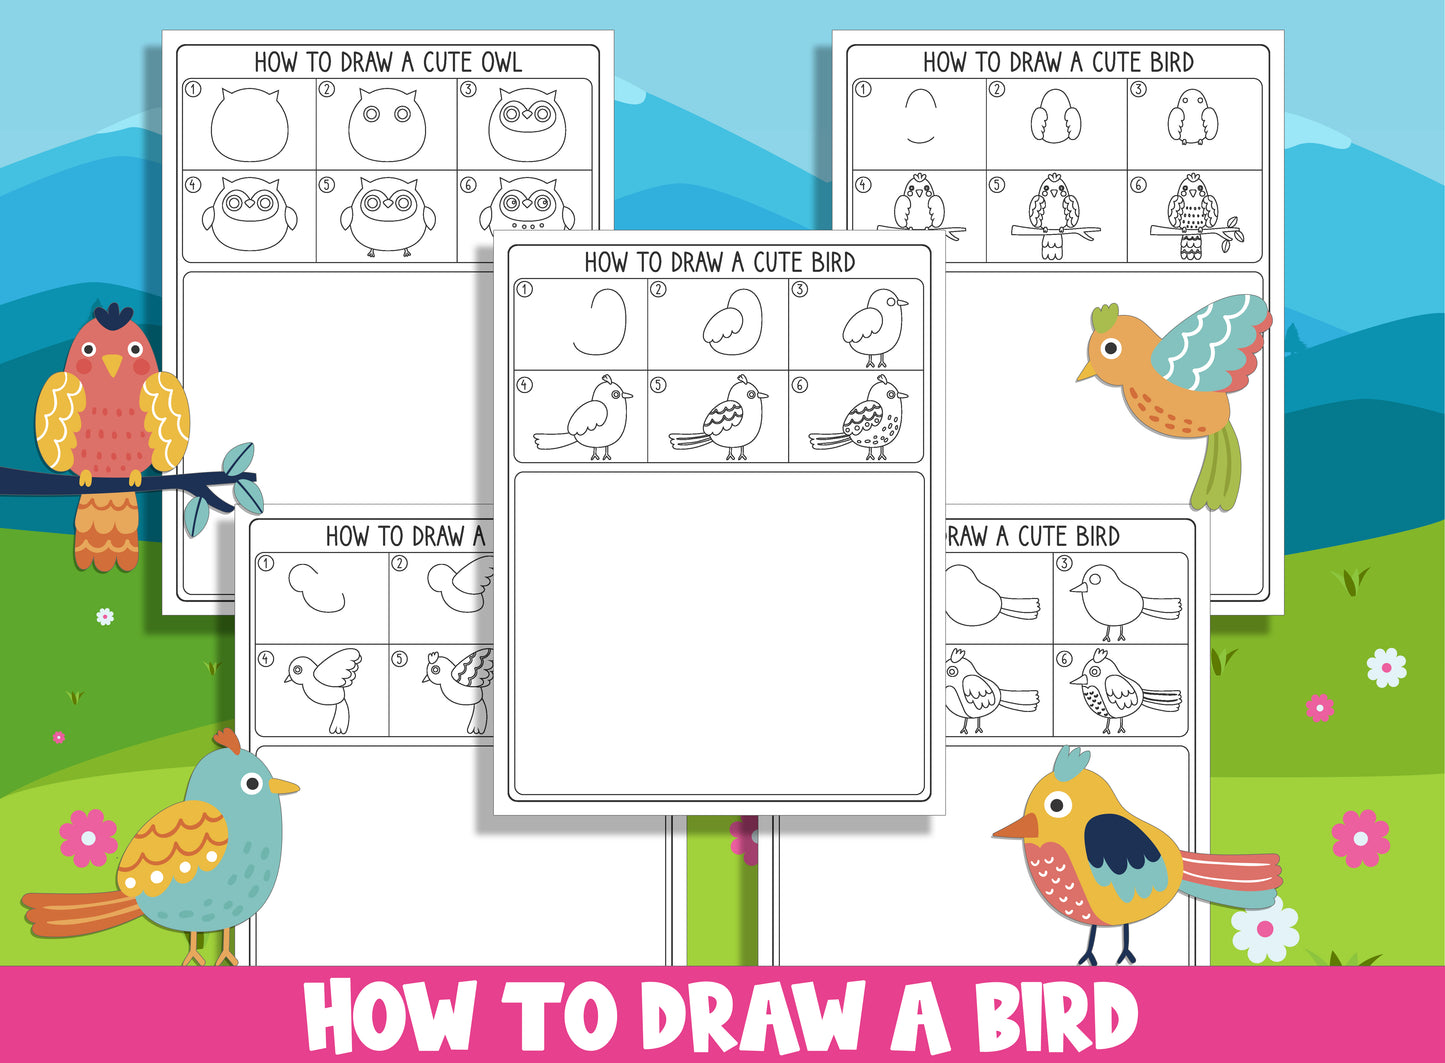 Learn How to Draw a Cute Bird and Owl, Directed Drawing Step by Step Tutorial, Includes 5 Coloring Pages, PDF File, Instant Download